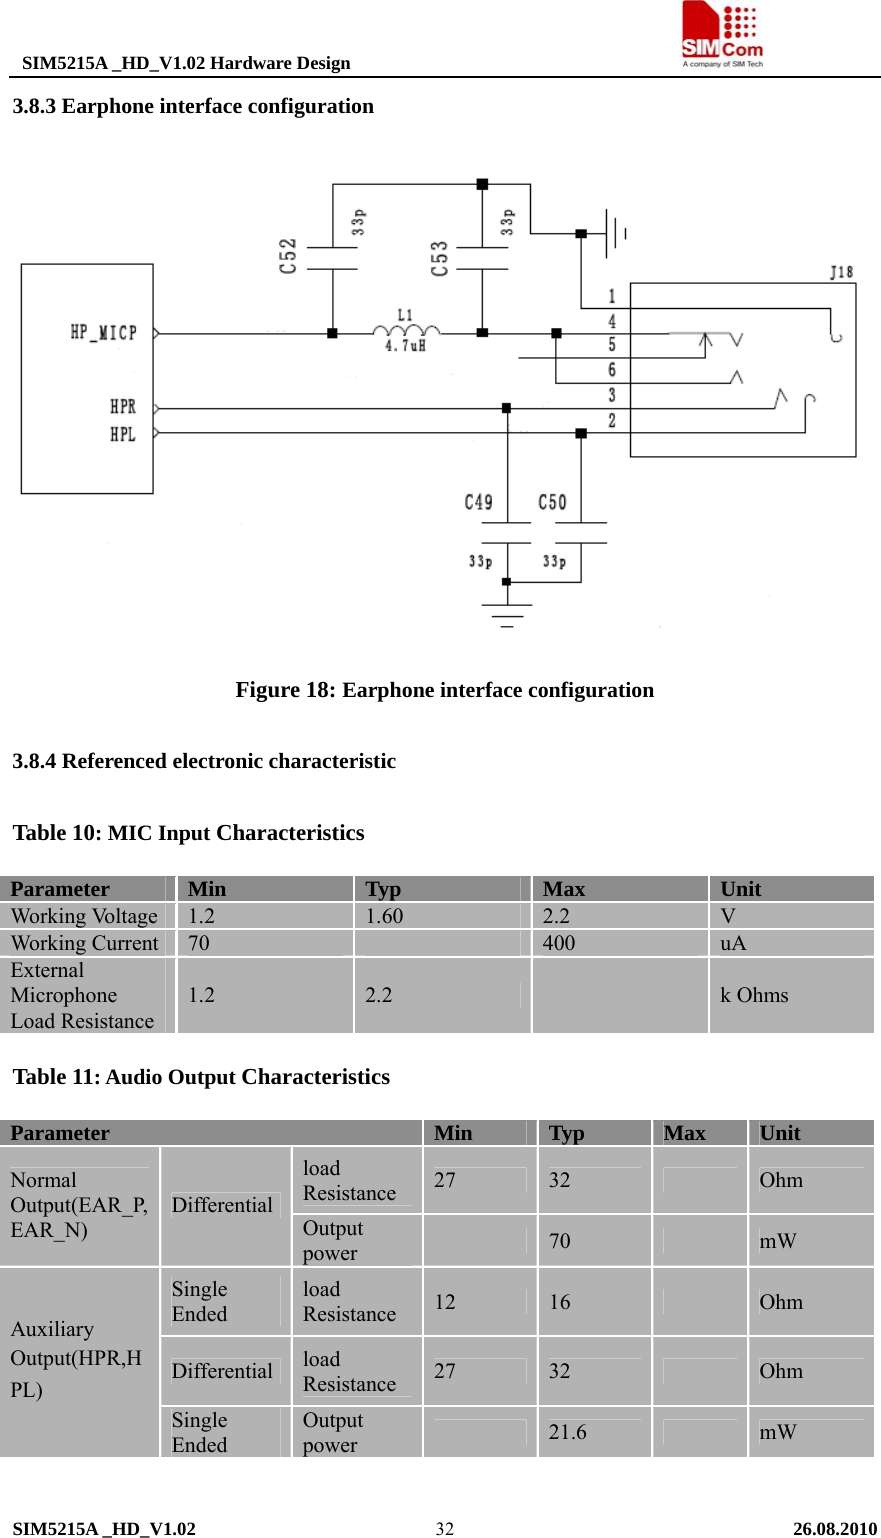  SIM5215A _HD_V1.02 Hardware Design                                     SIM5215A _HD_V1.02   26.08.2010   323.8.3 Earphone interface configuration  Figure 18: Earphone interface configuration 3.8.4 Referenced electronic characteristic Table 10: MIC Input Characteristics Parameter  Min  Typ  Max  Unit Working Voltage  1.2  1.60  2.2  V Working Current  70   400  uA External Microphone Load Resistance 1.2  2.2   k Ohms Table 11: Audio Output Characteristics Parameter  Min  Typ  Max  Unit load Resistance  27  32   Ohm Normal Output(EAR_P,EAR_N) Differential Output power   70   mW Single Ended  load Resistance  12  16   Ohm Differential  load Resistance  27  32   Ohm Auxiliary Output(HPR,HPL) Single Ended Output power   21.6   mW  